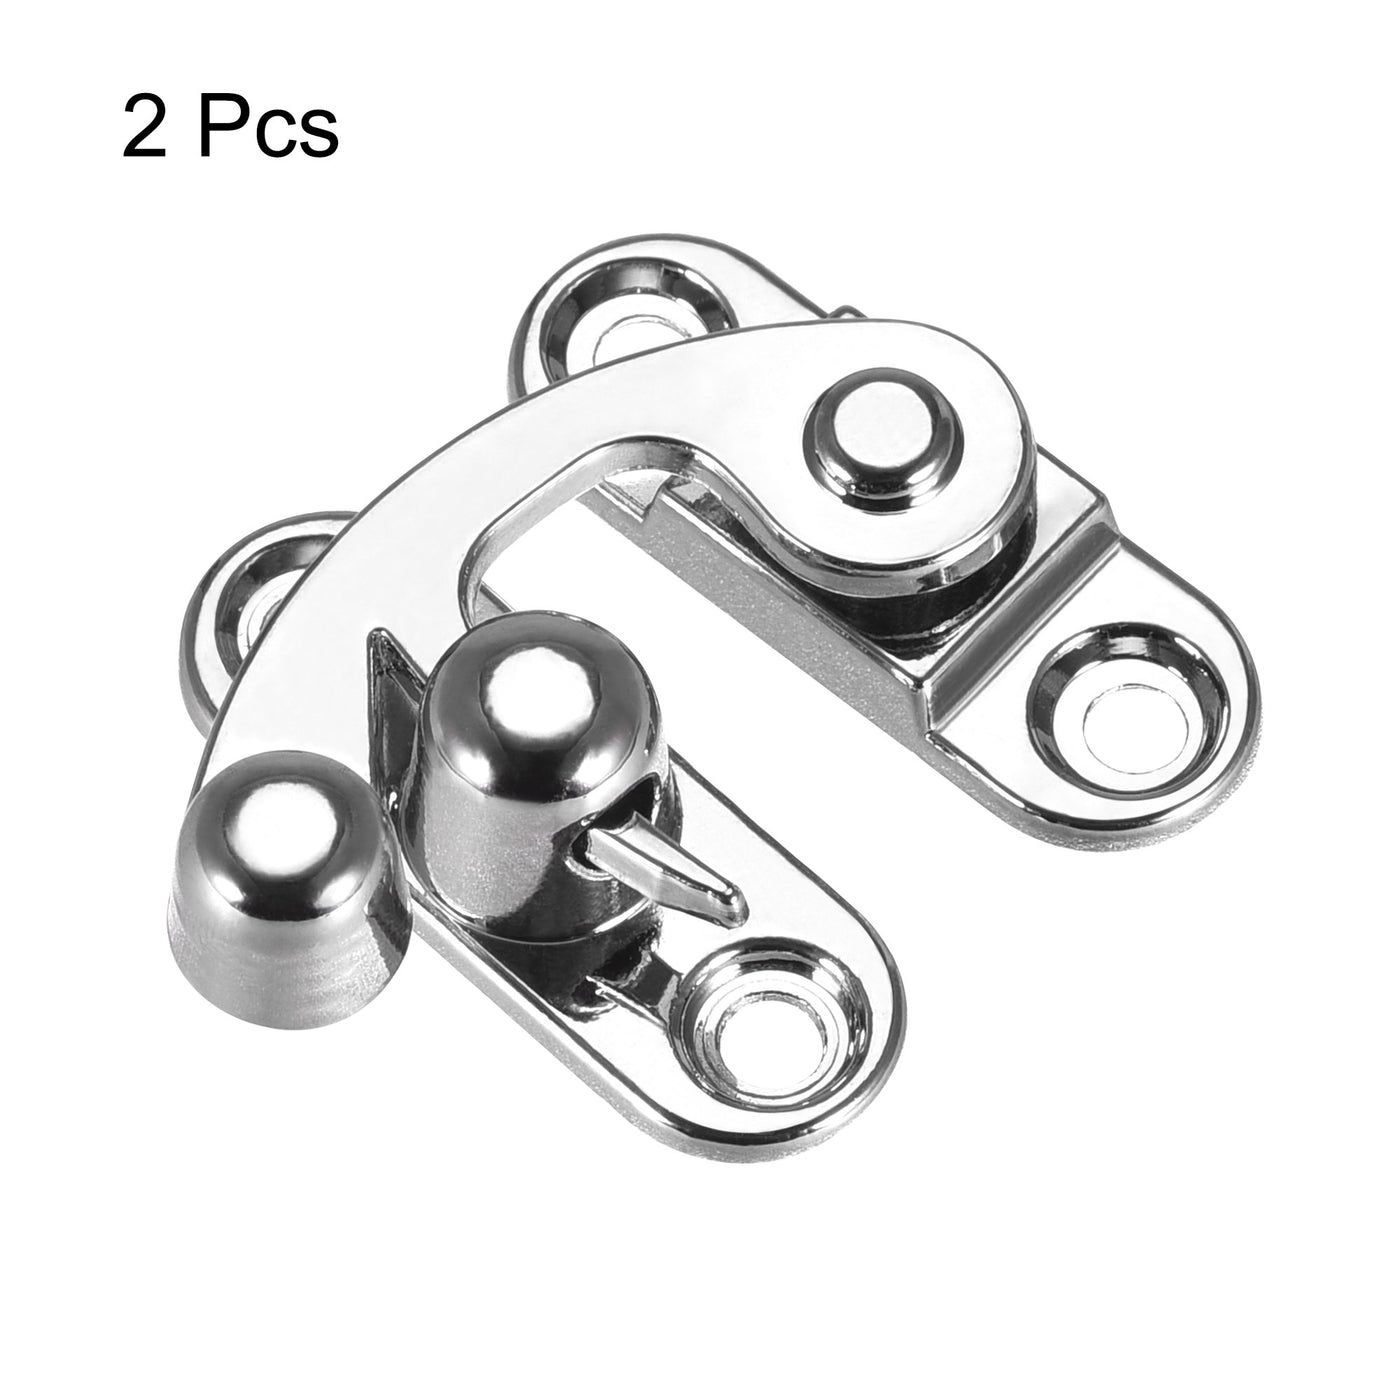 uxcell Uxcell Antique Vintage Lock Clasp Left Latch Hook Hasp 33mmx28mm Swing Arm Latch Silver Tone 2 Pcs